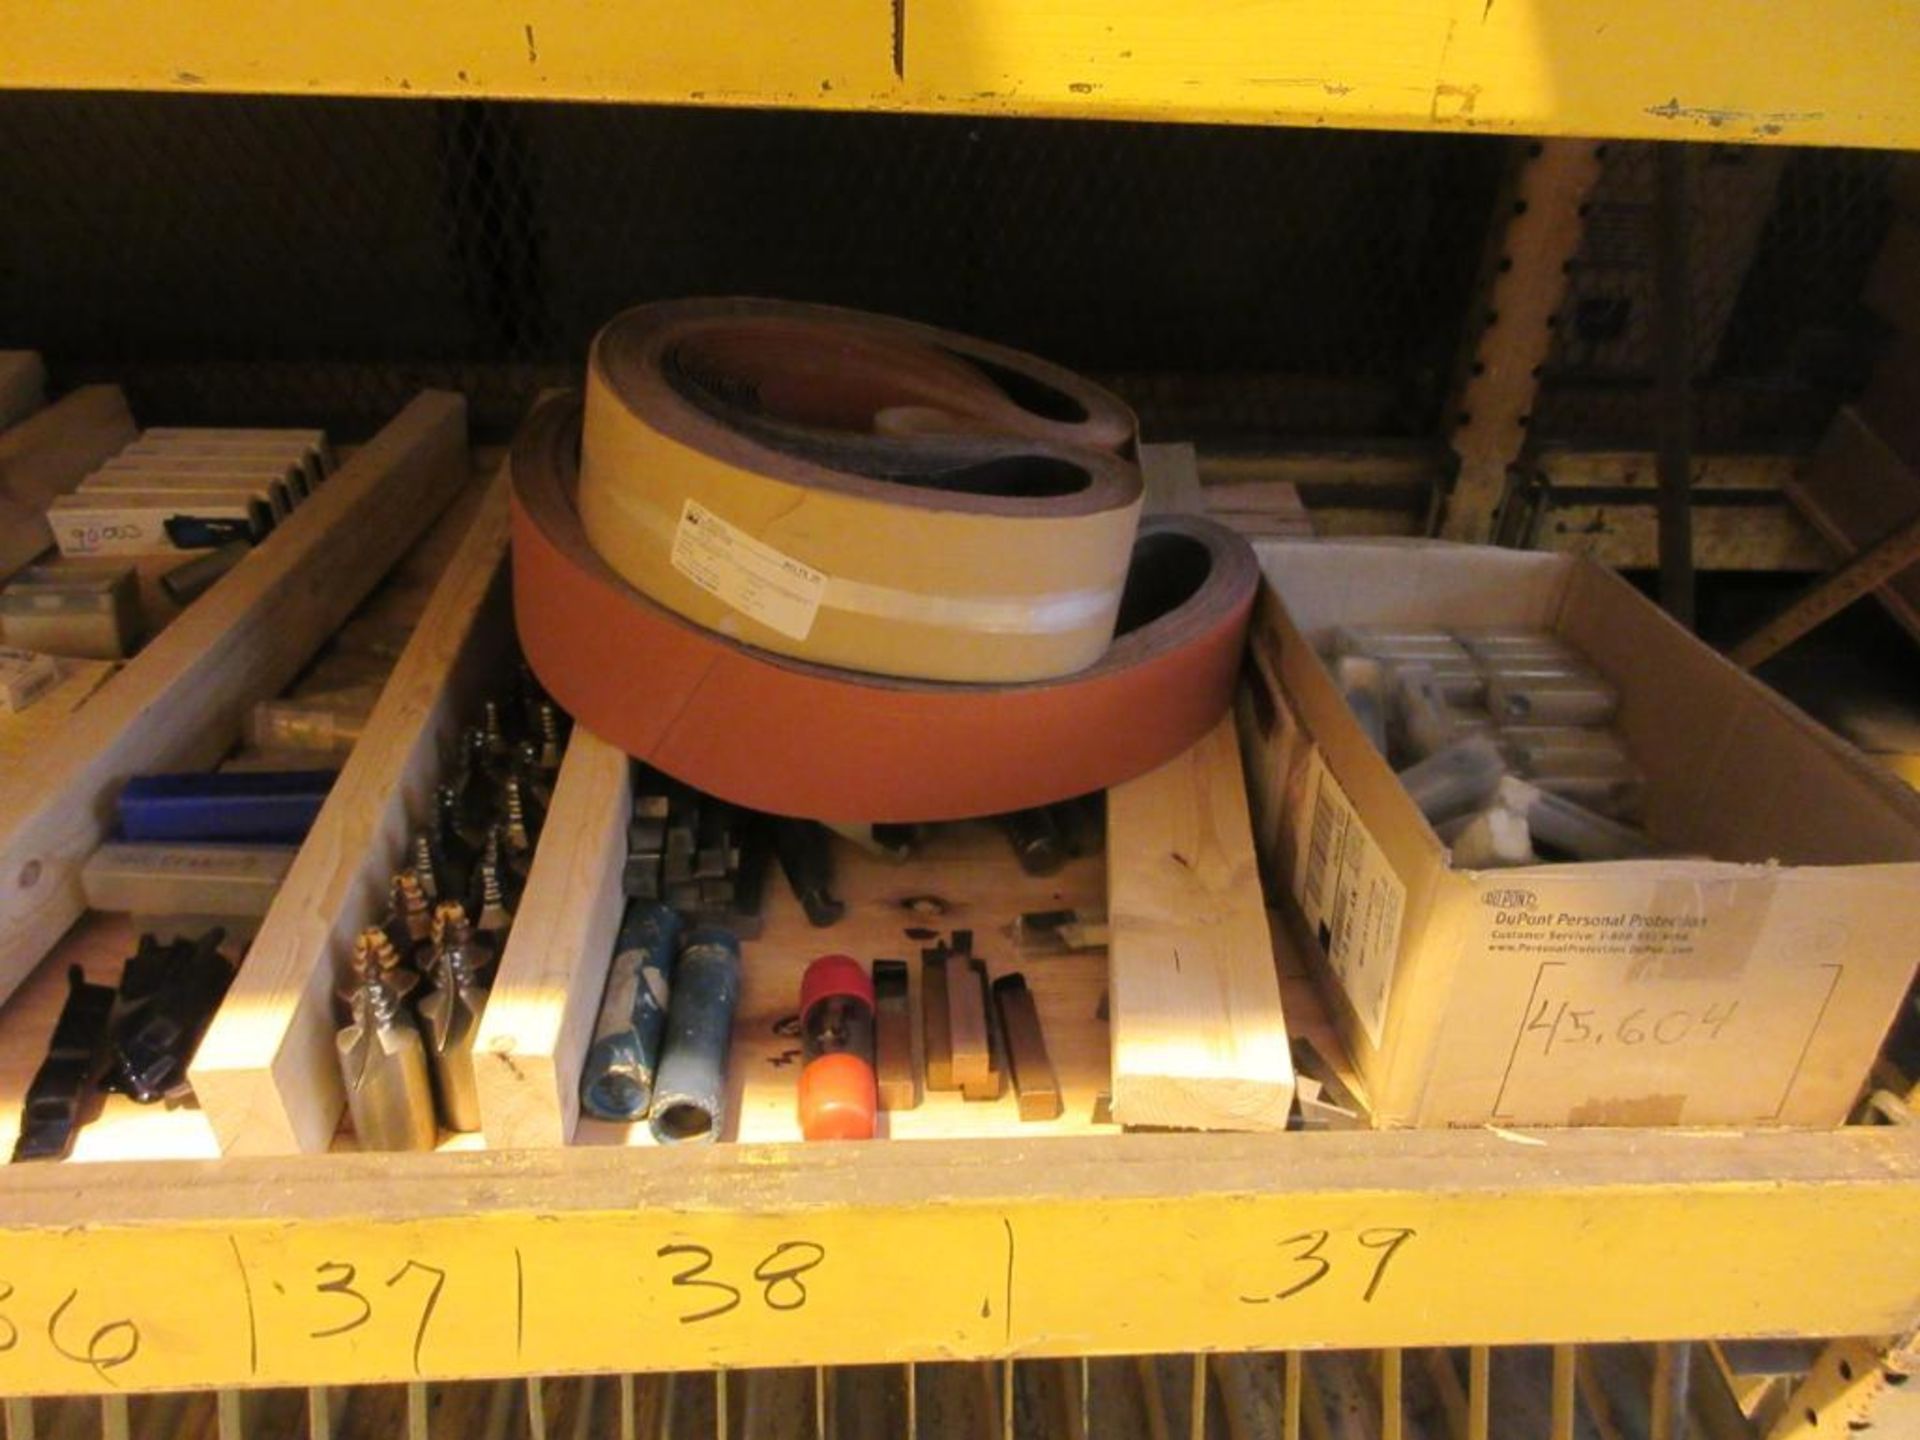 CONTENTS OF (22) SECTIONS PALLET RACK: ASSORTED ABRASIVES, SUNNEN STONES, TOOL BITS, DOVETAIL CUTTER - Image 8 of 43